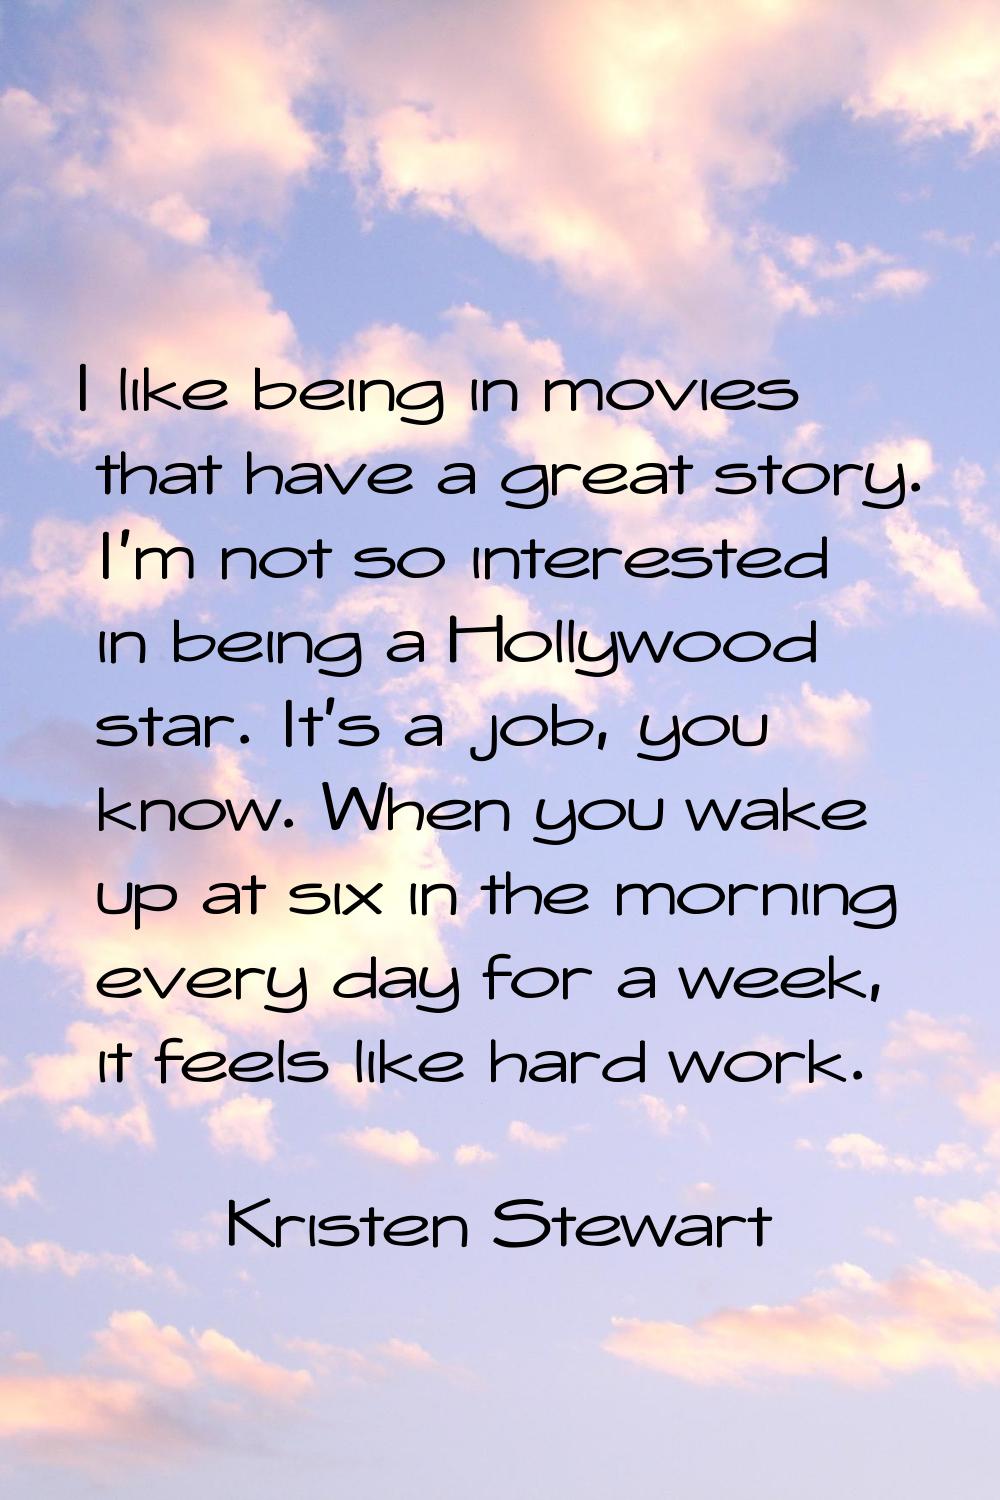 I like being in movies that have a great story. I'm not so interested in being a Hollywood star. It